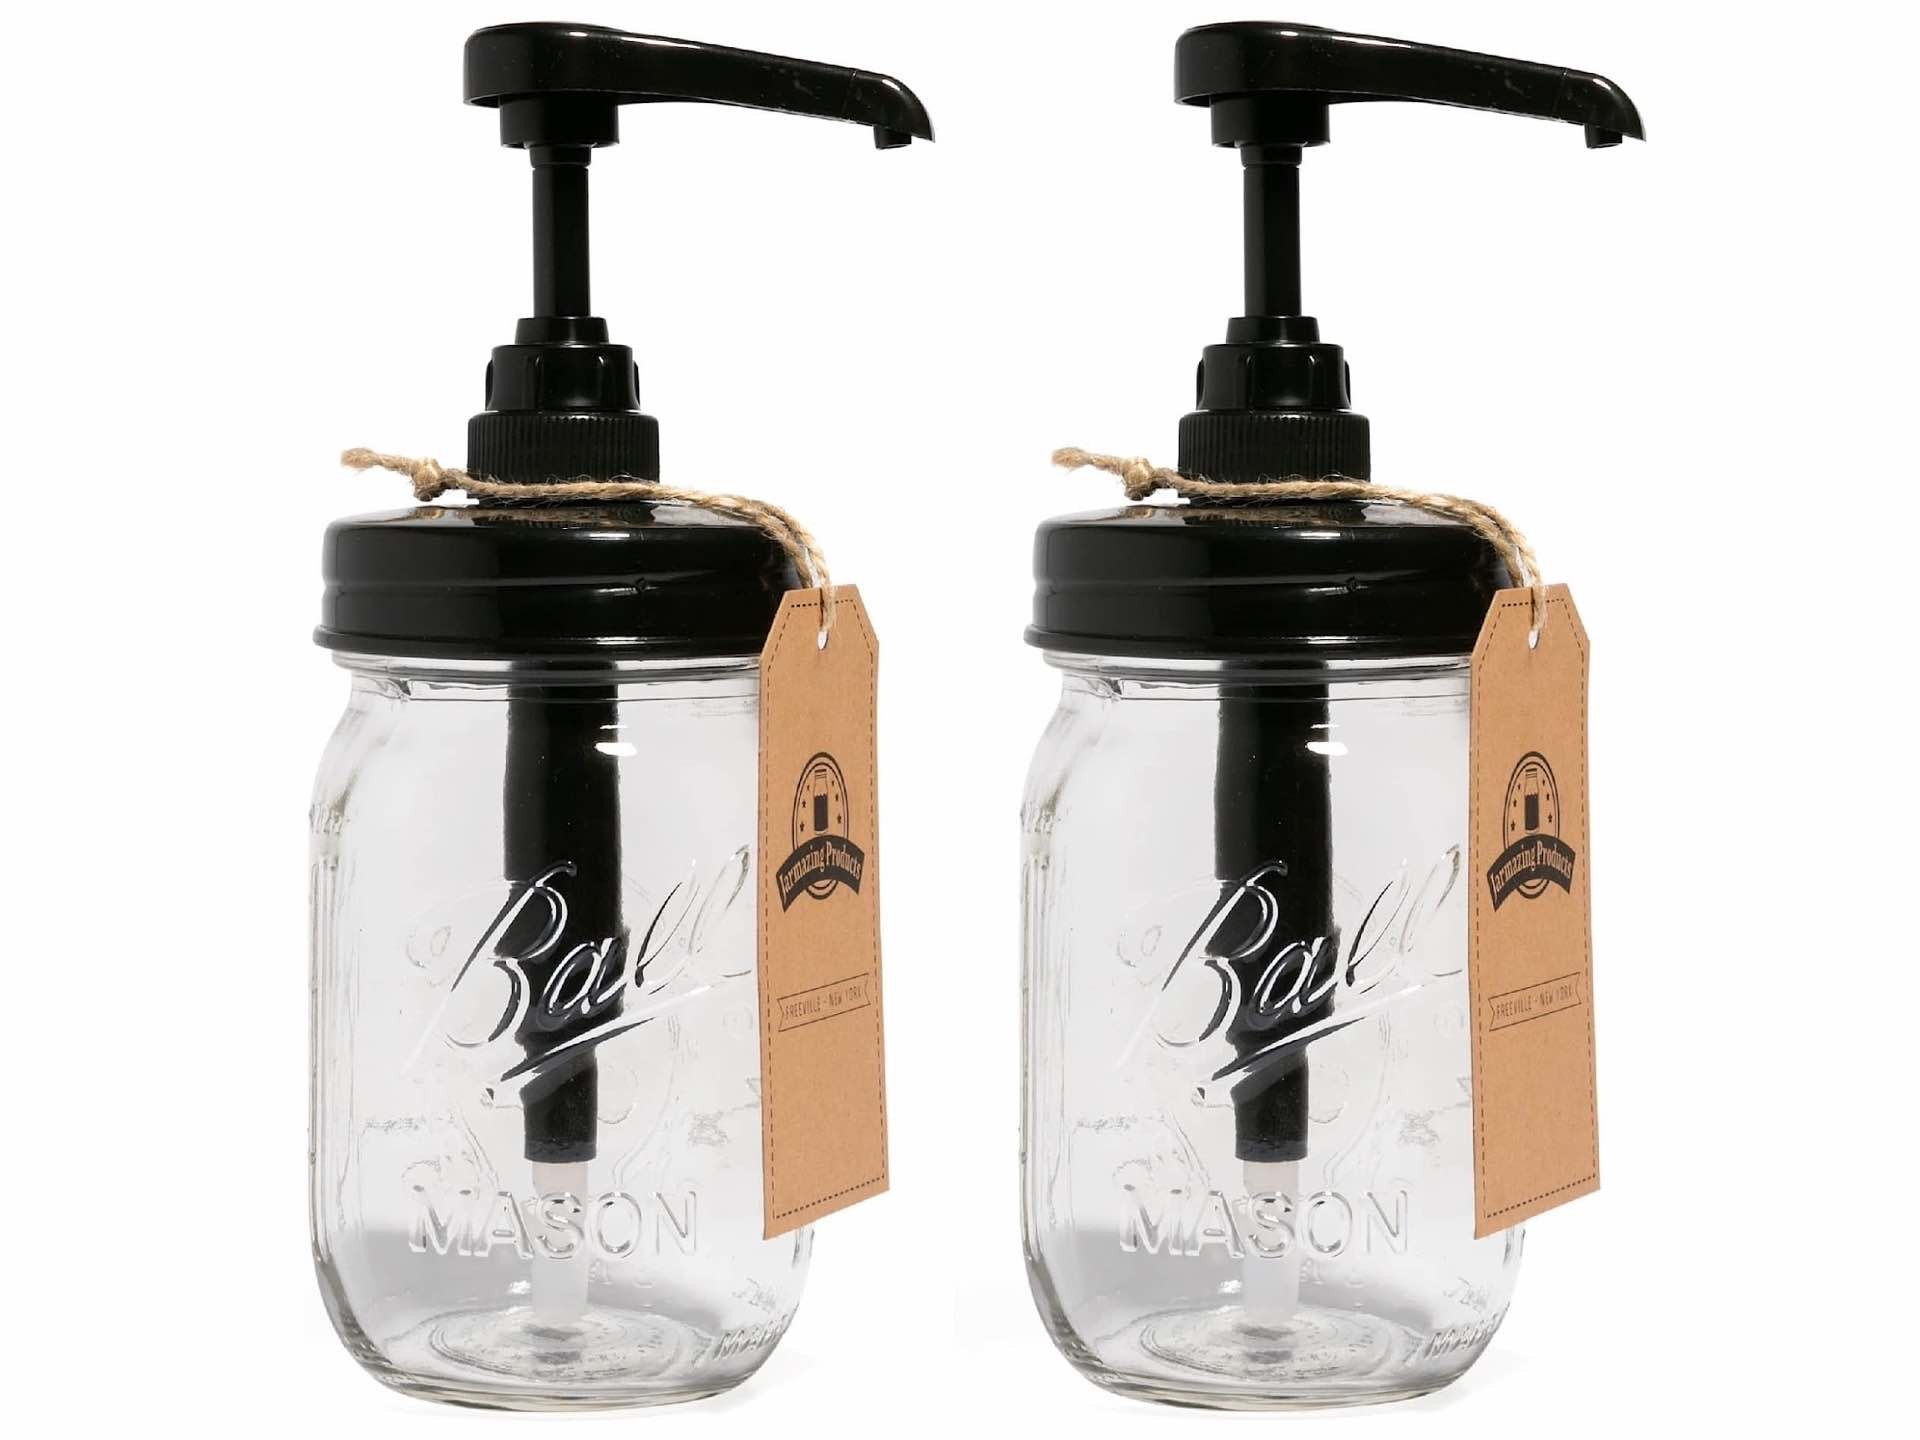 Jarmazing mason jar syrup dispensers. ($23 for set of two)